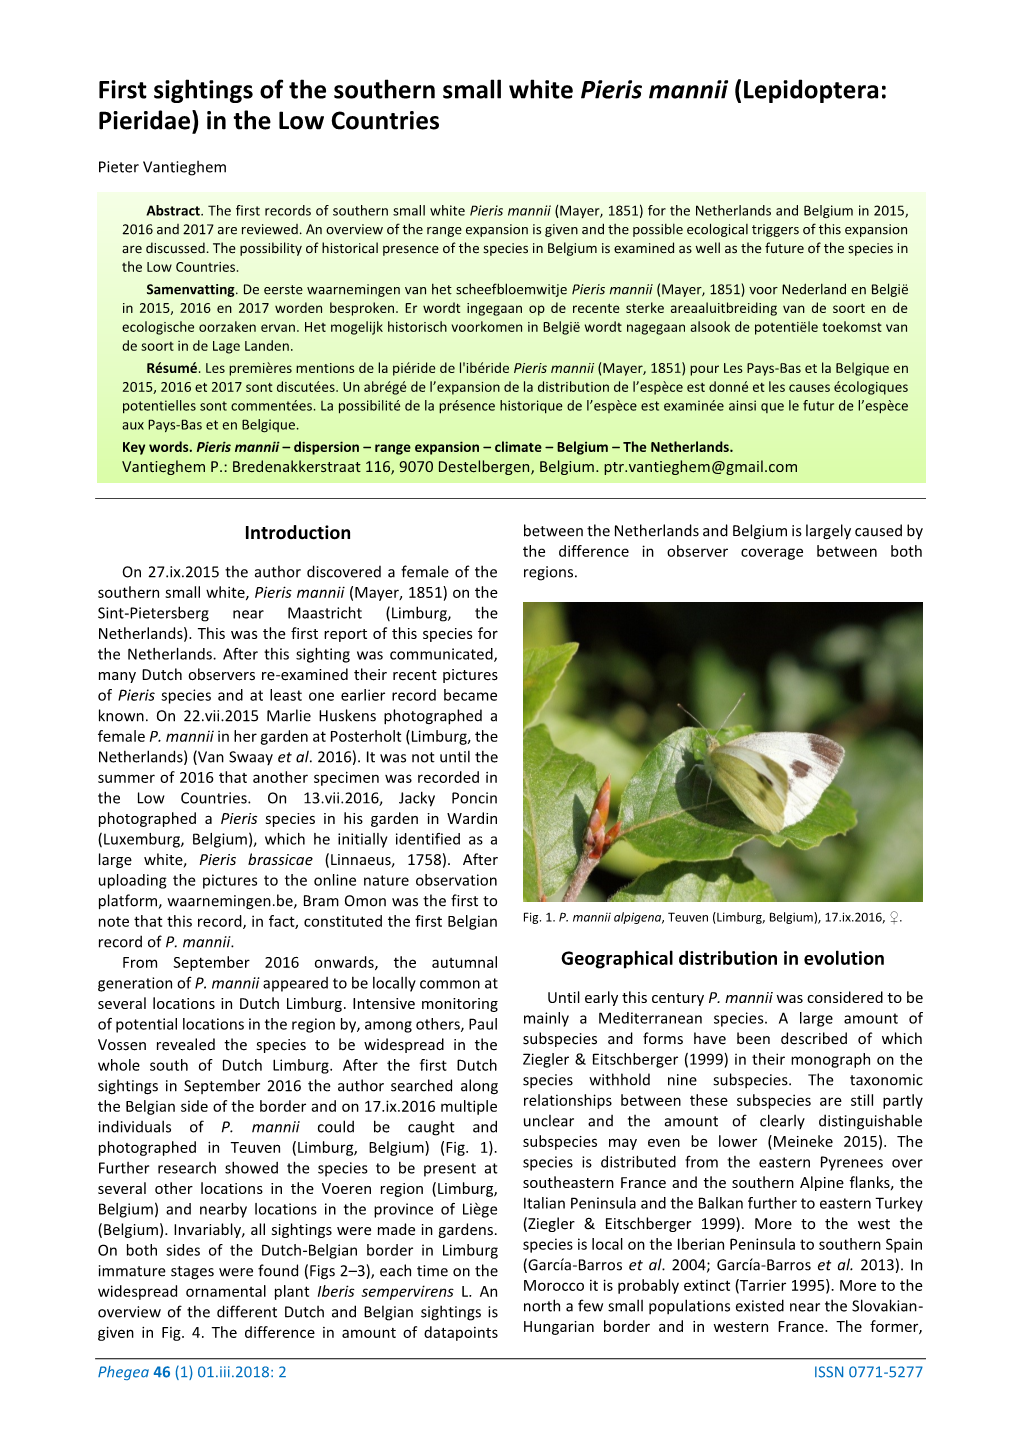 First Sightings of the Southern Small White Pieris Mannii (Lepidoptera: Pieridae) in the Low Countries